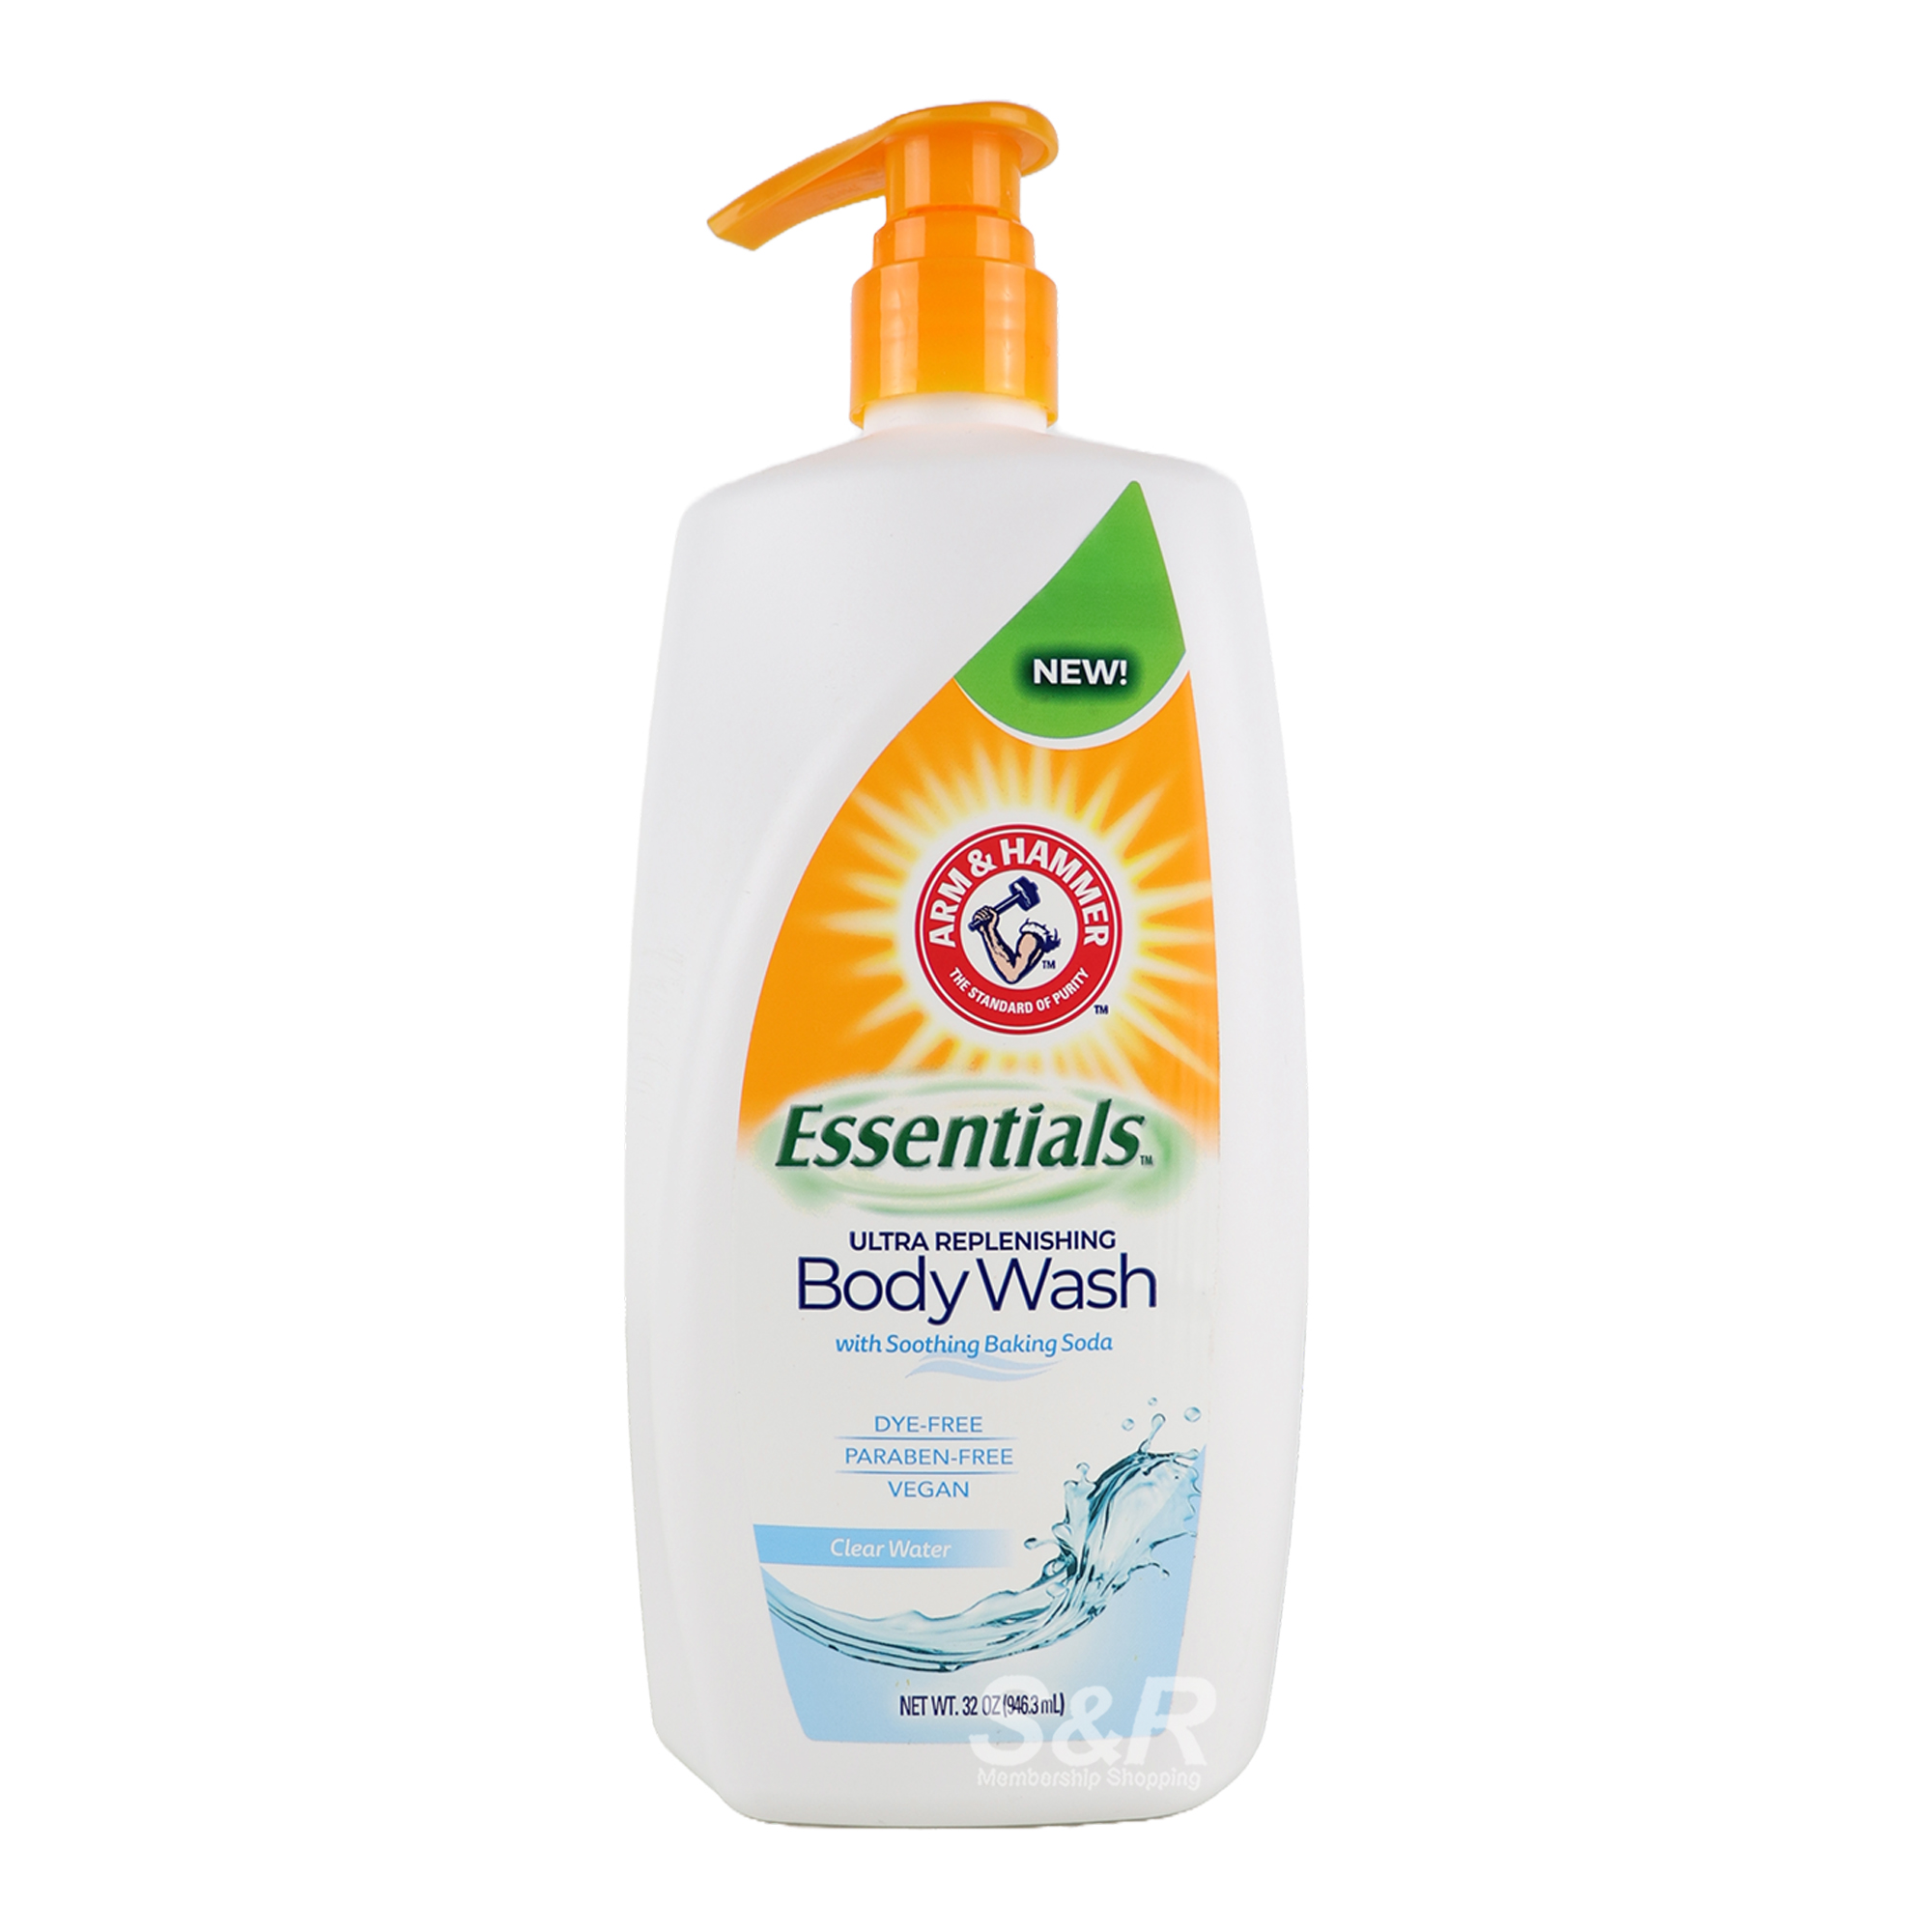 Arm and Hammer Clean Water Scent Body Wash 946.3mL